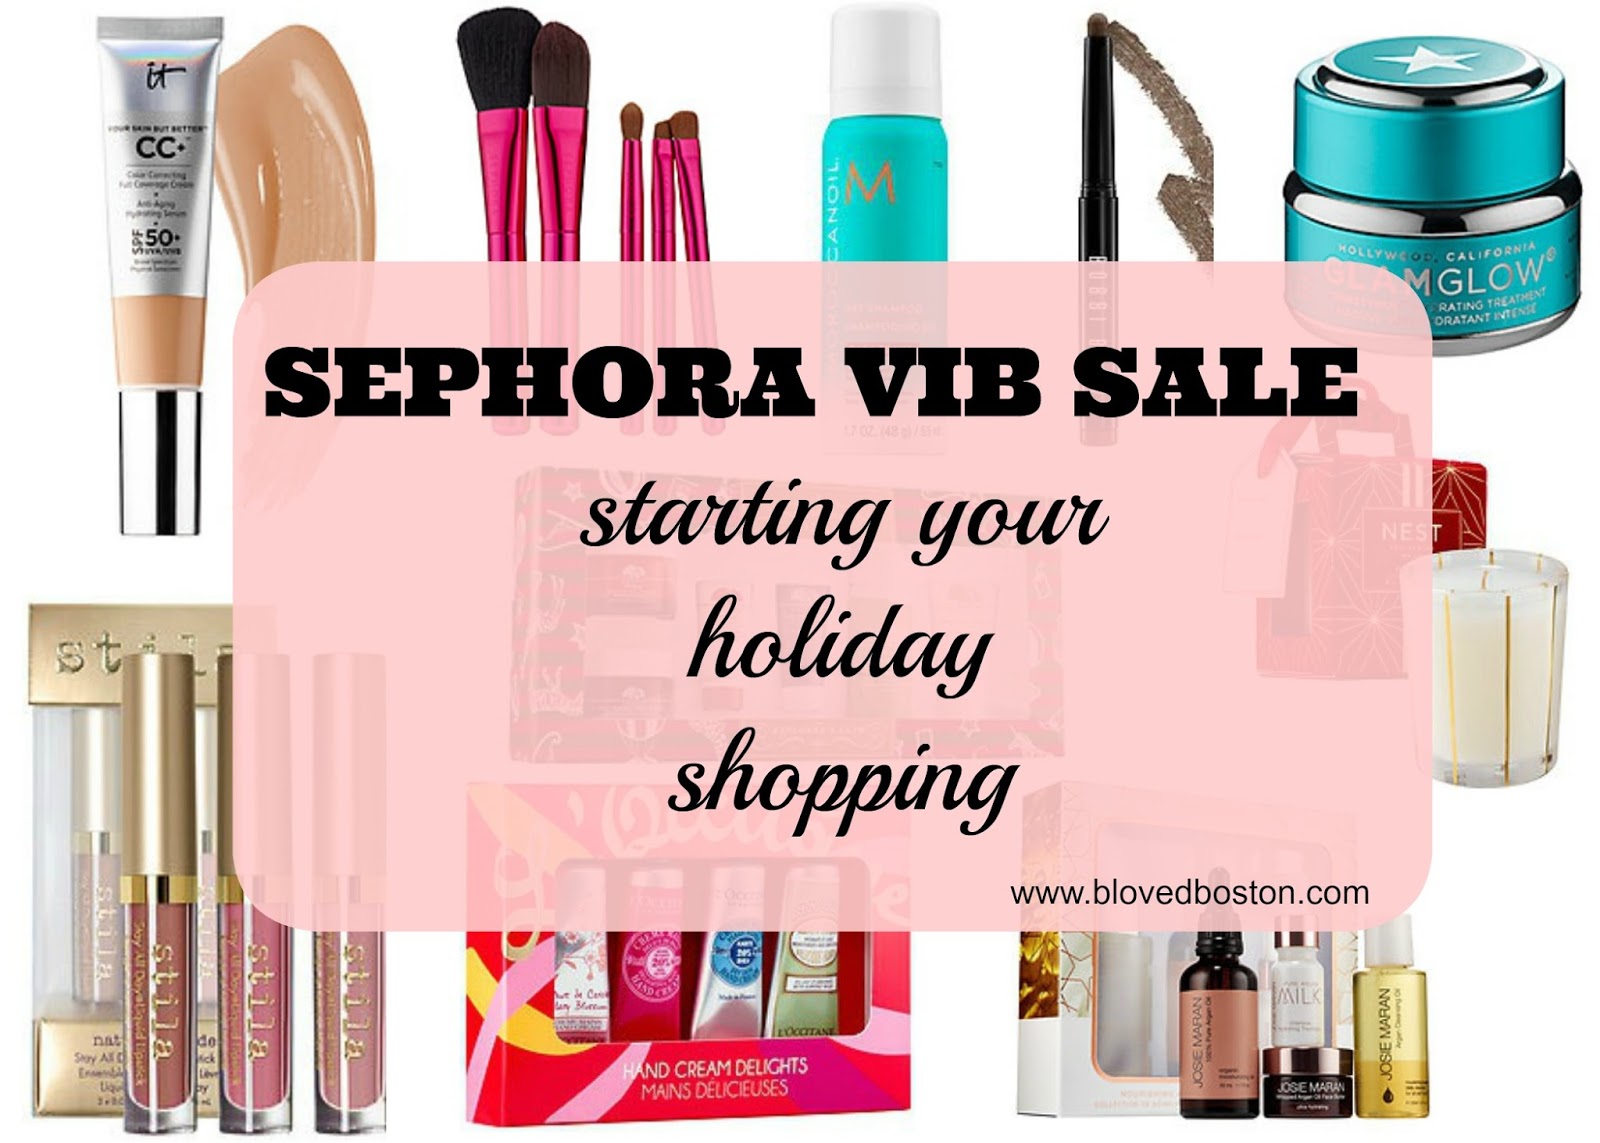 Sephora VIB Sale | For the ladies on your holiday list